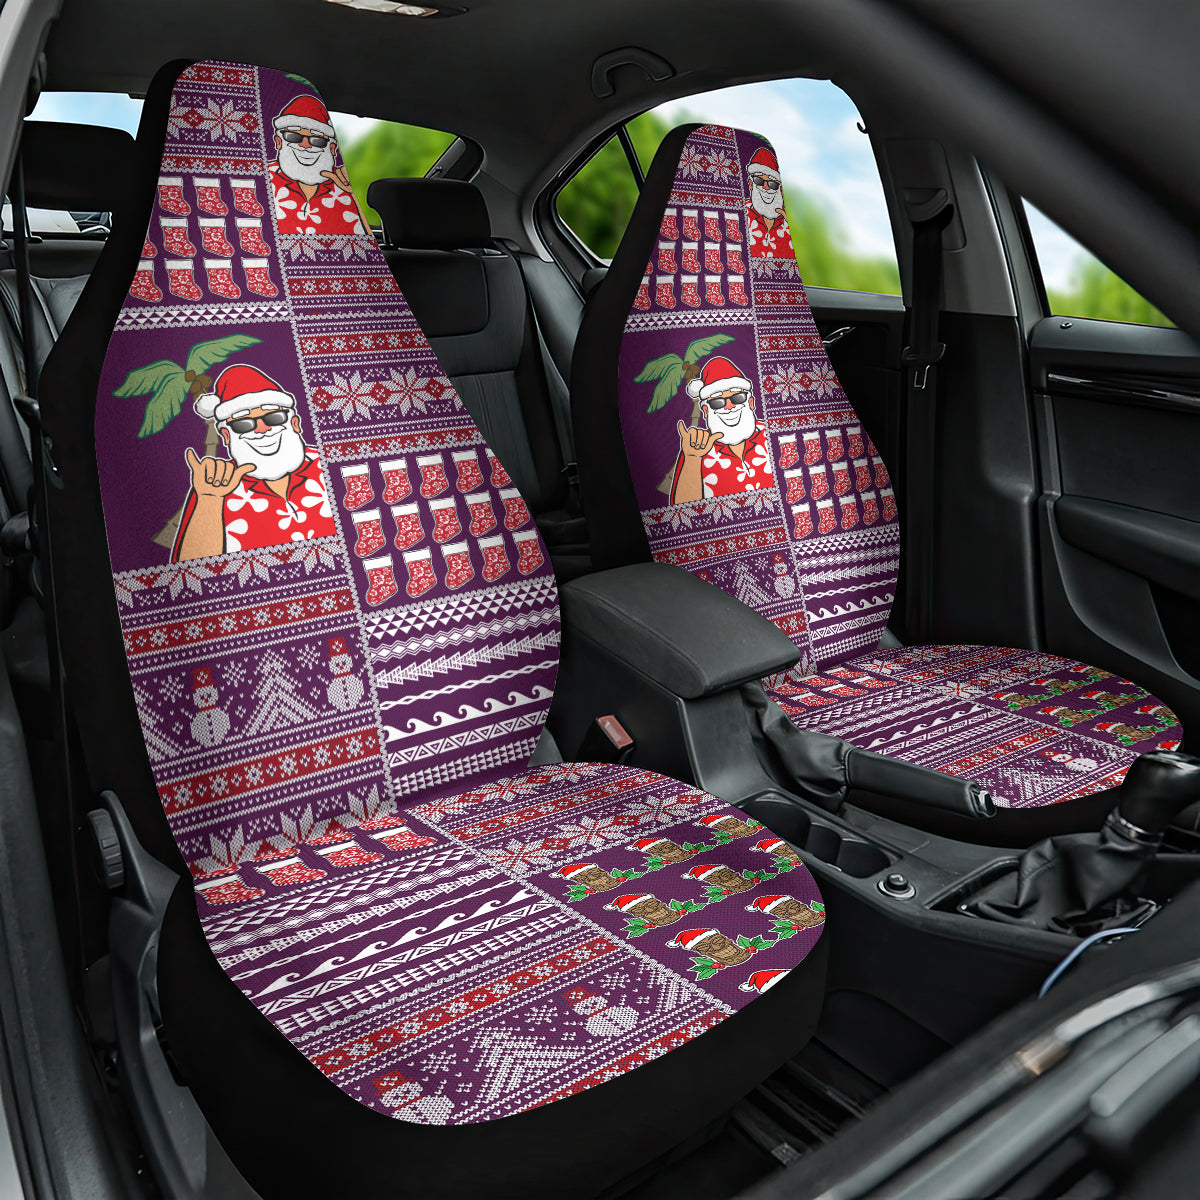 Hawaii Mele Kalikimaka Car Seat Cover Aloha and Christmas Elements Patchwork Pink Style LT03 One Size Pink - Polynesian Pride